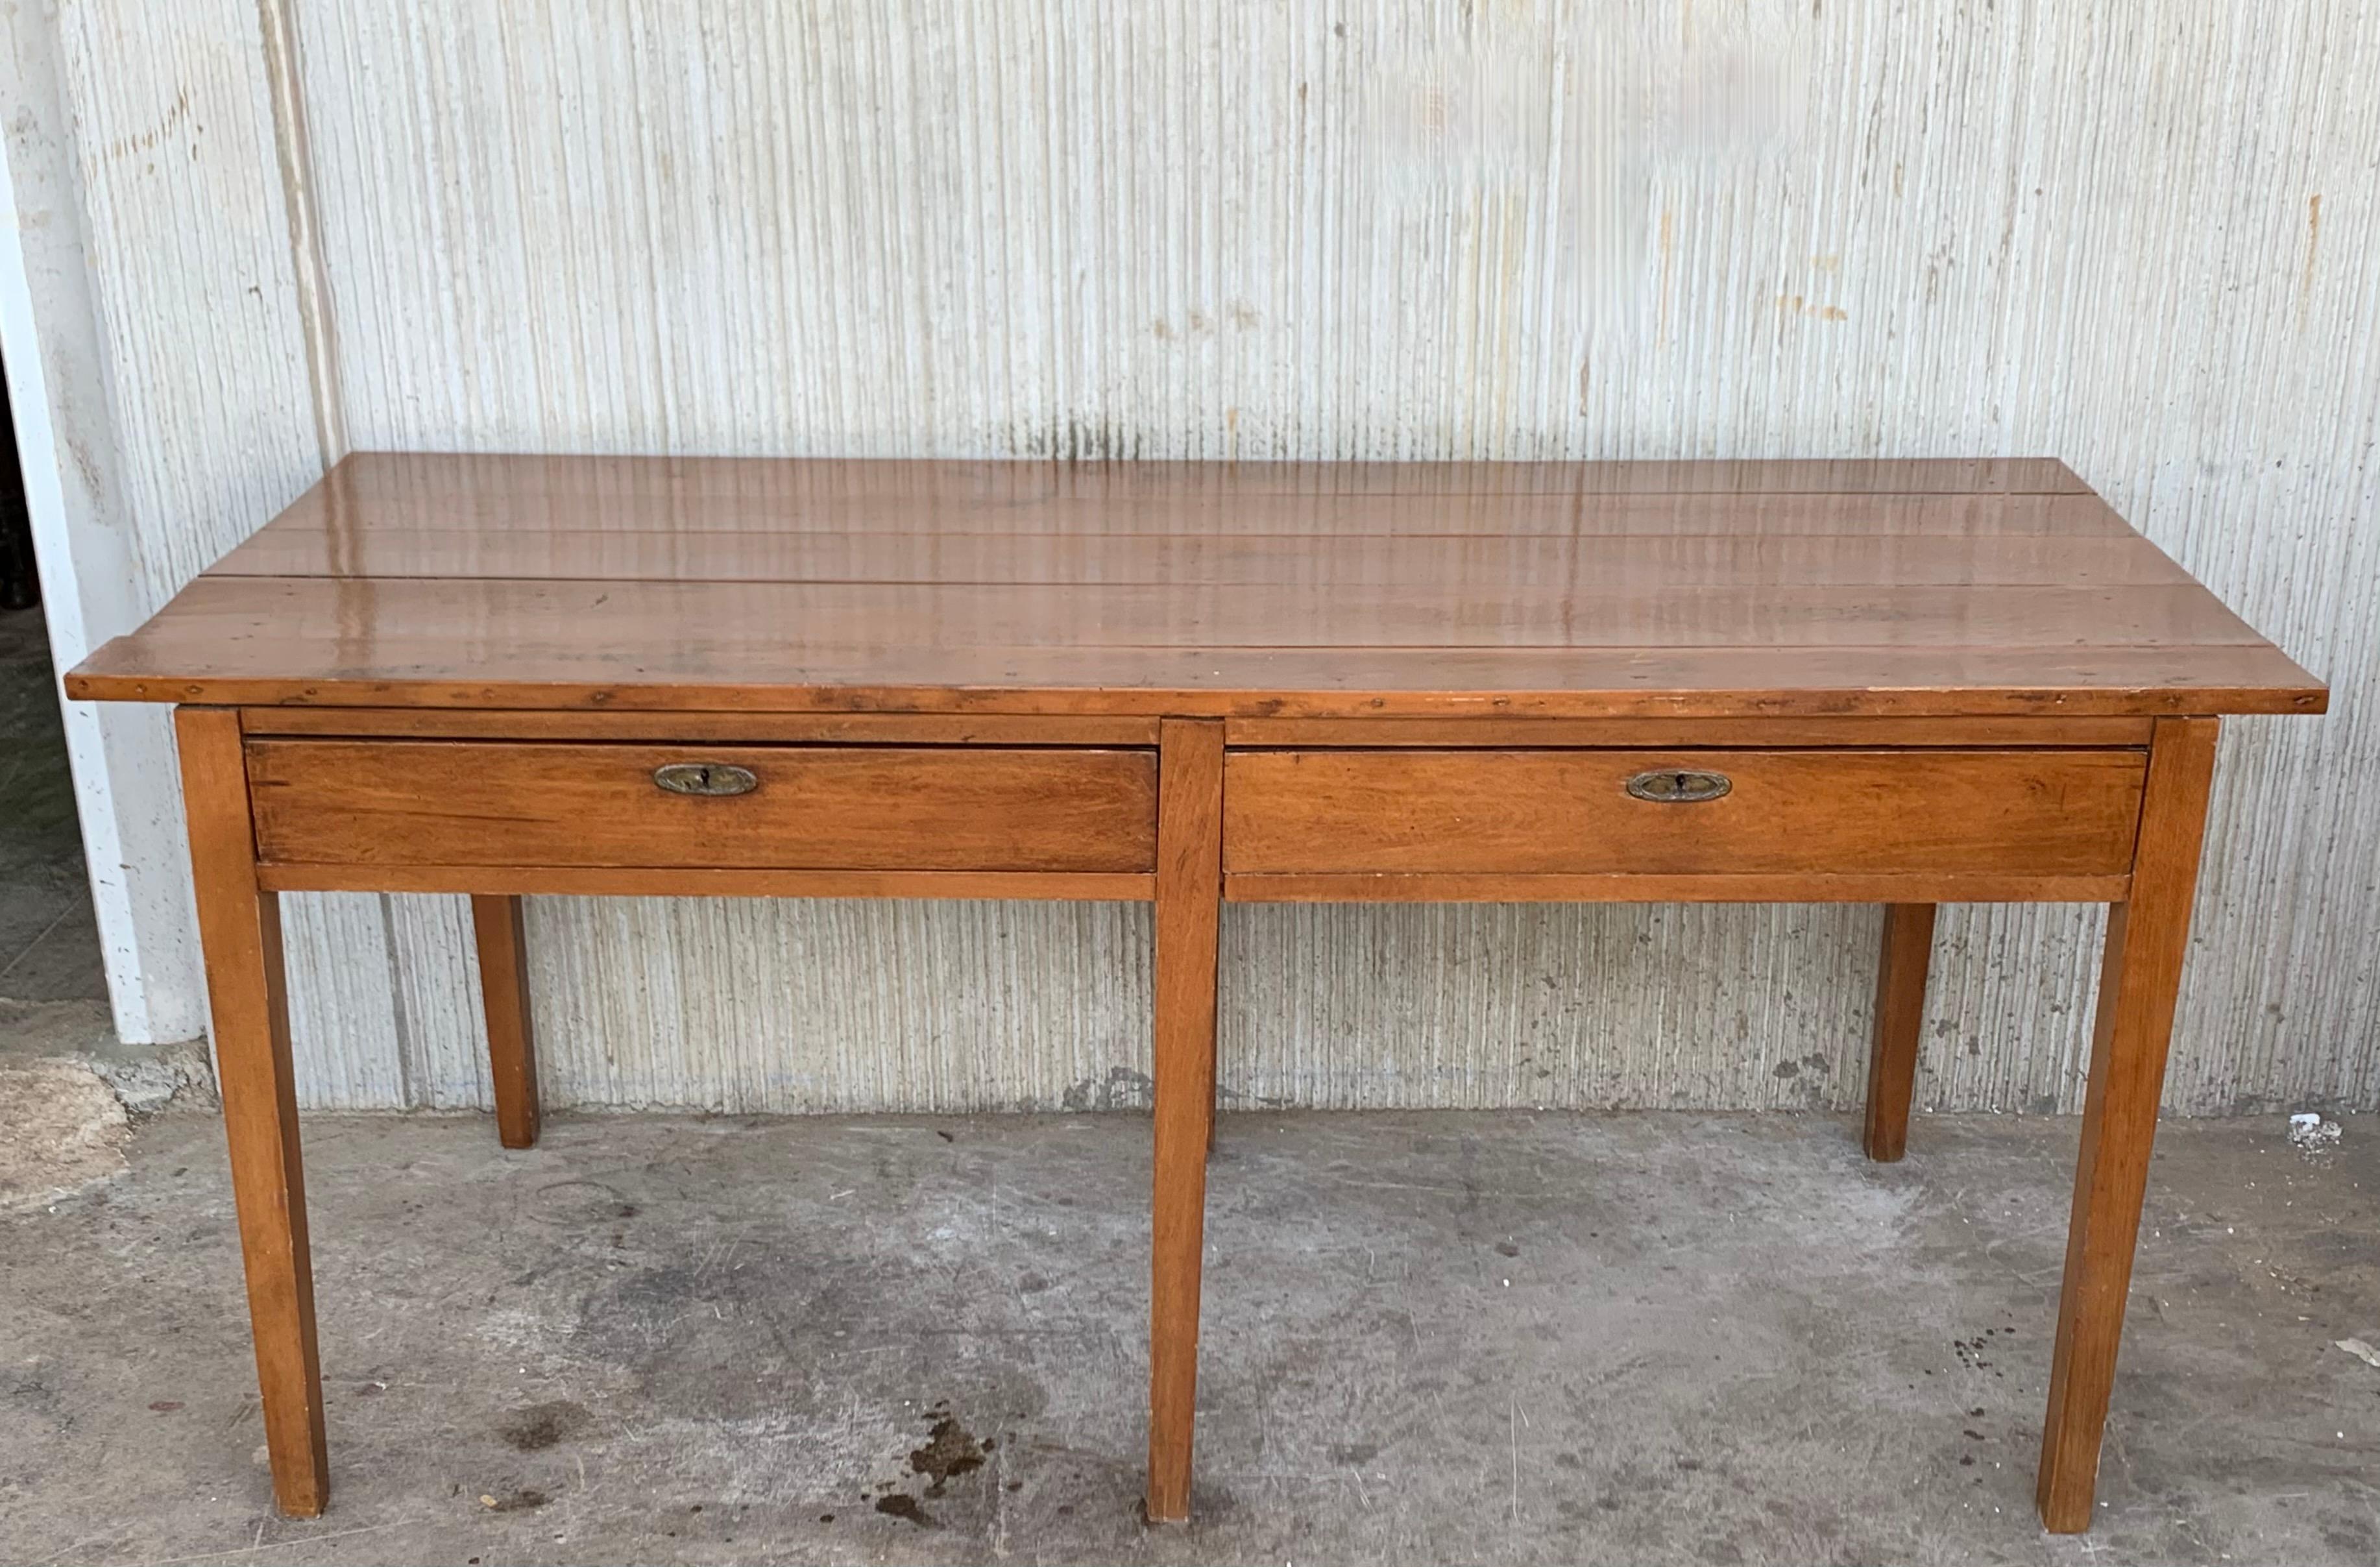 A charming early 20th century Spanish pine farm table with six legs and a wonderfully well-worn finish from a century of use. Table works well for dining, but can also be used as a desk, work table or butcher block.
The table will be perfectly